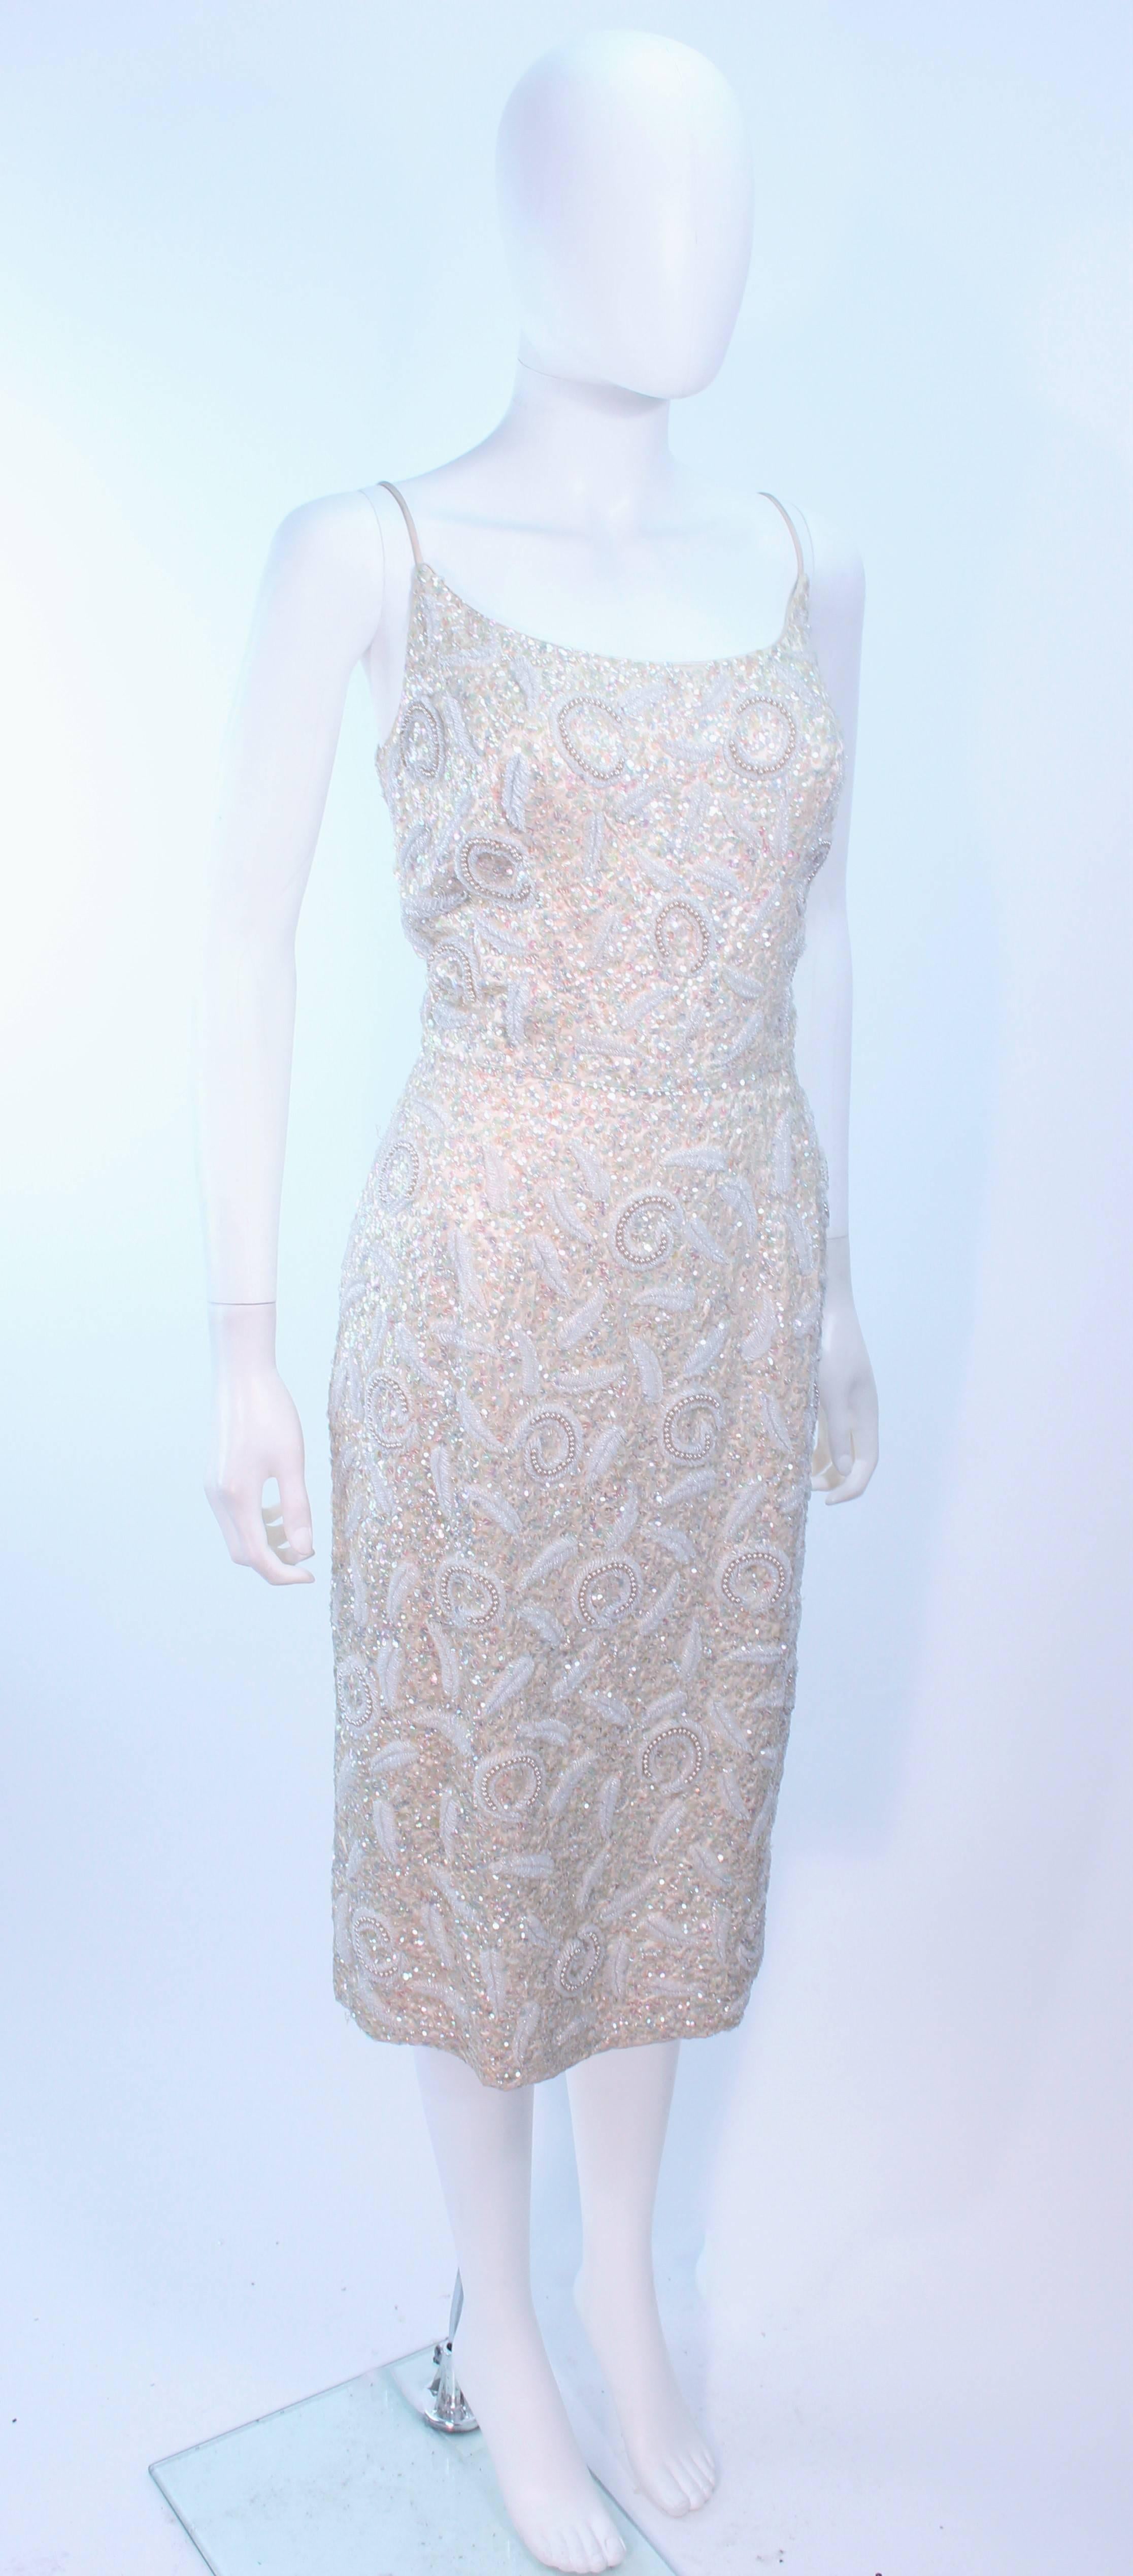 SWEE LO HAUTE COUTURE INTERNATIONAL Ivory Iridescent Cocktail Dress Size 8 10 In Excellent Condition For Sale In Los Angeles, CA